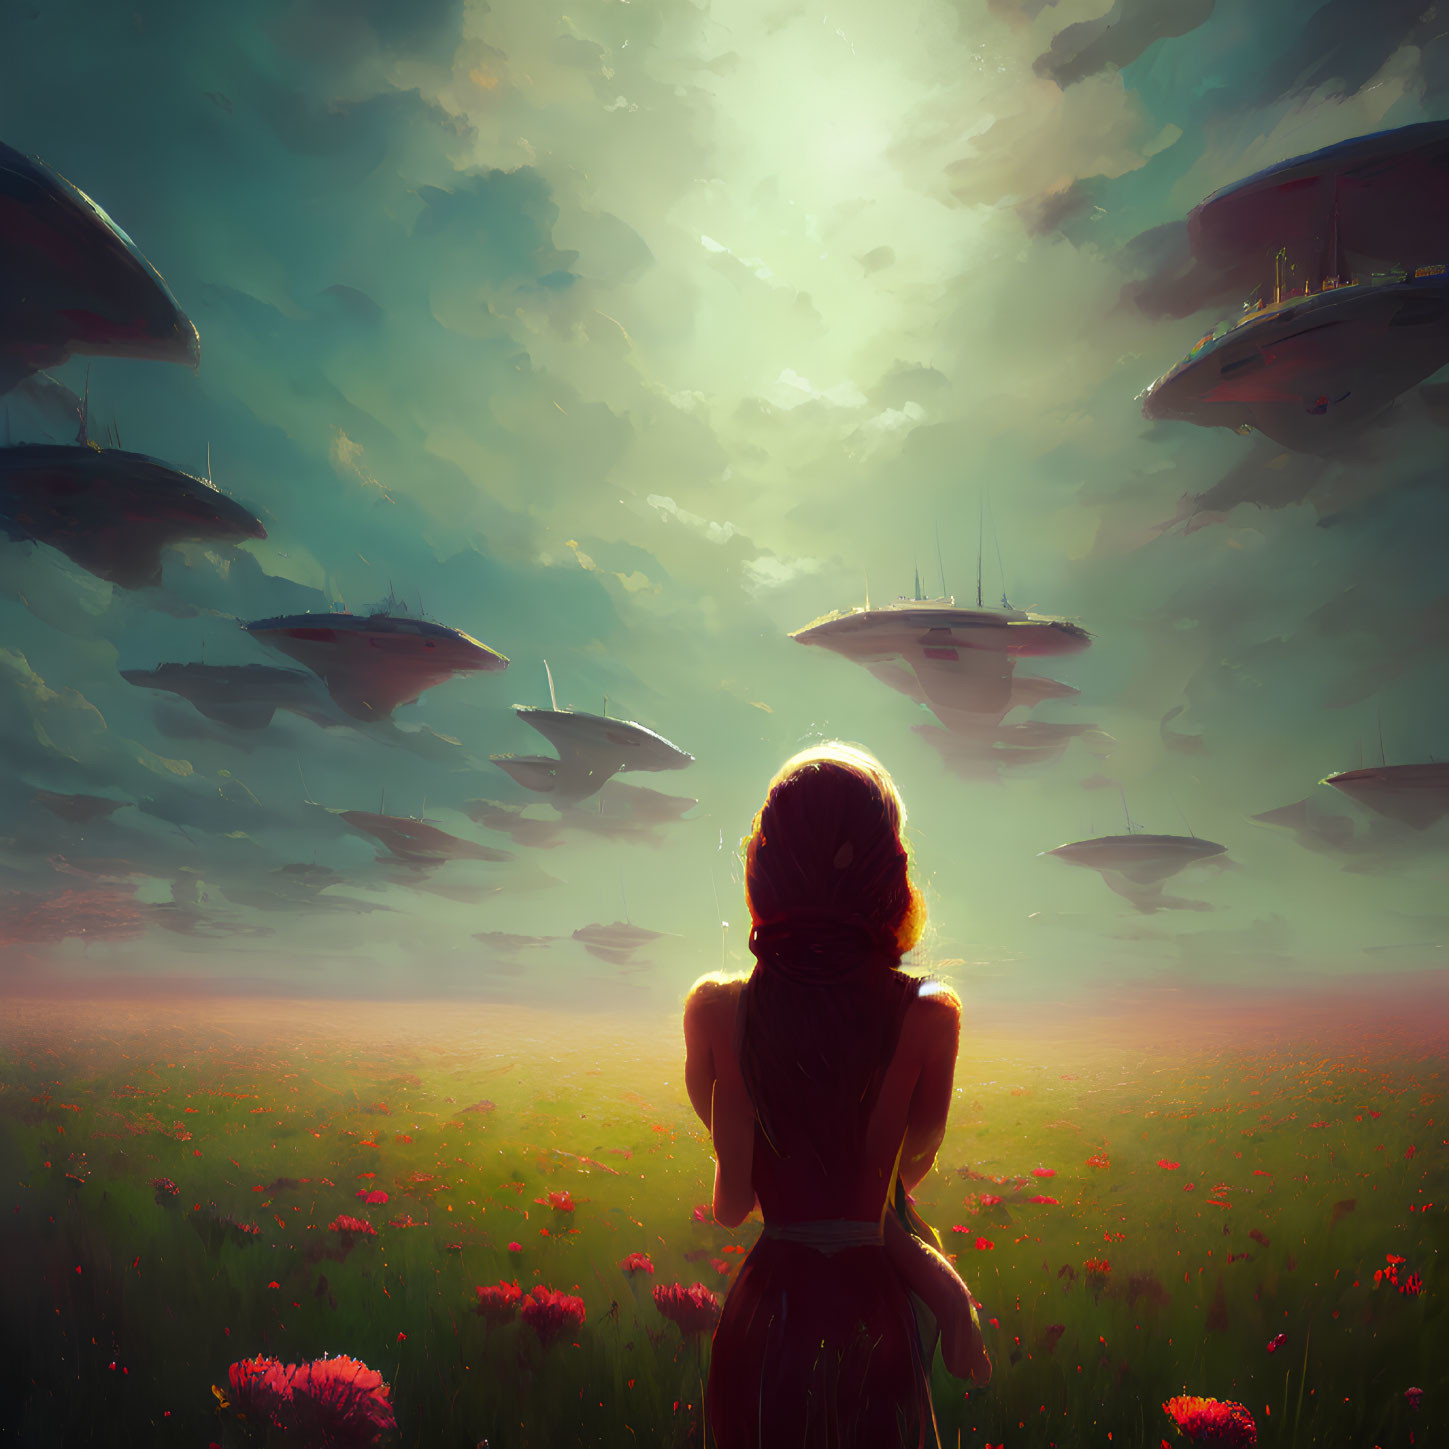 Woman admires floating islands over red flower field in mystical light